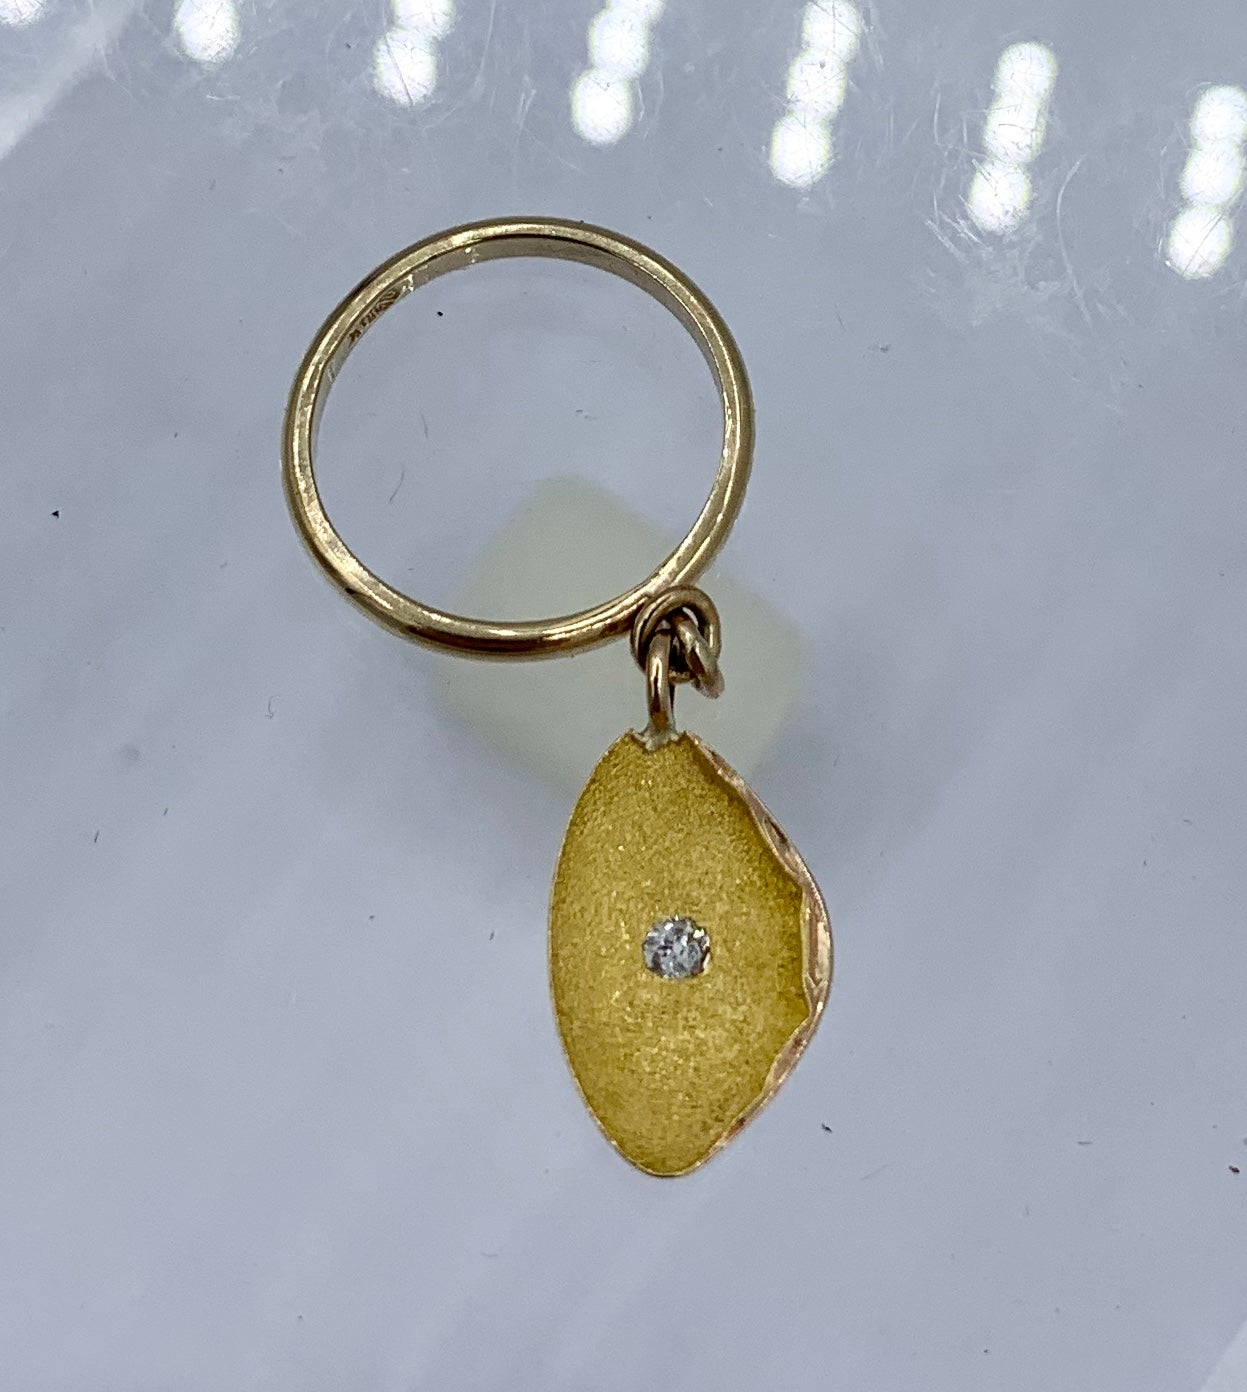 THIS IS A WONDERFUL 14 KARAT GOLD CHARM RING IN THE FORM OF AN OYSTER WITH A SPARKLING OLD MINE CUT DIAMOND.  THE ANTIQUE RING HAS A GORGEOUS OYSTER SHELL PENDANT.  THE INSIDE OF THE OYSTER HAS A FABULOUS BRUSHED GOLD FINISH AND IS SET WITH A